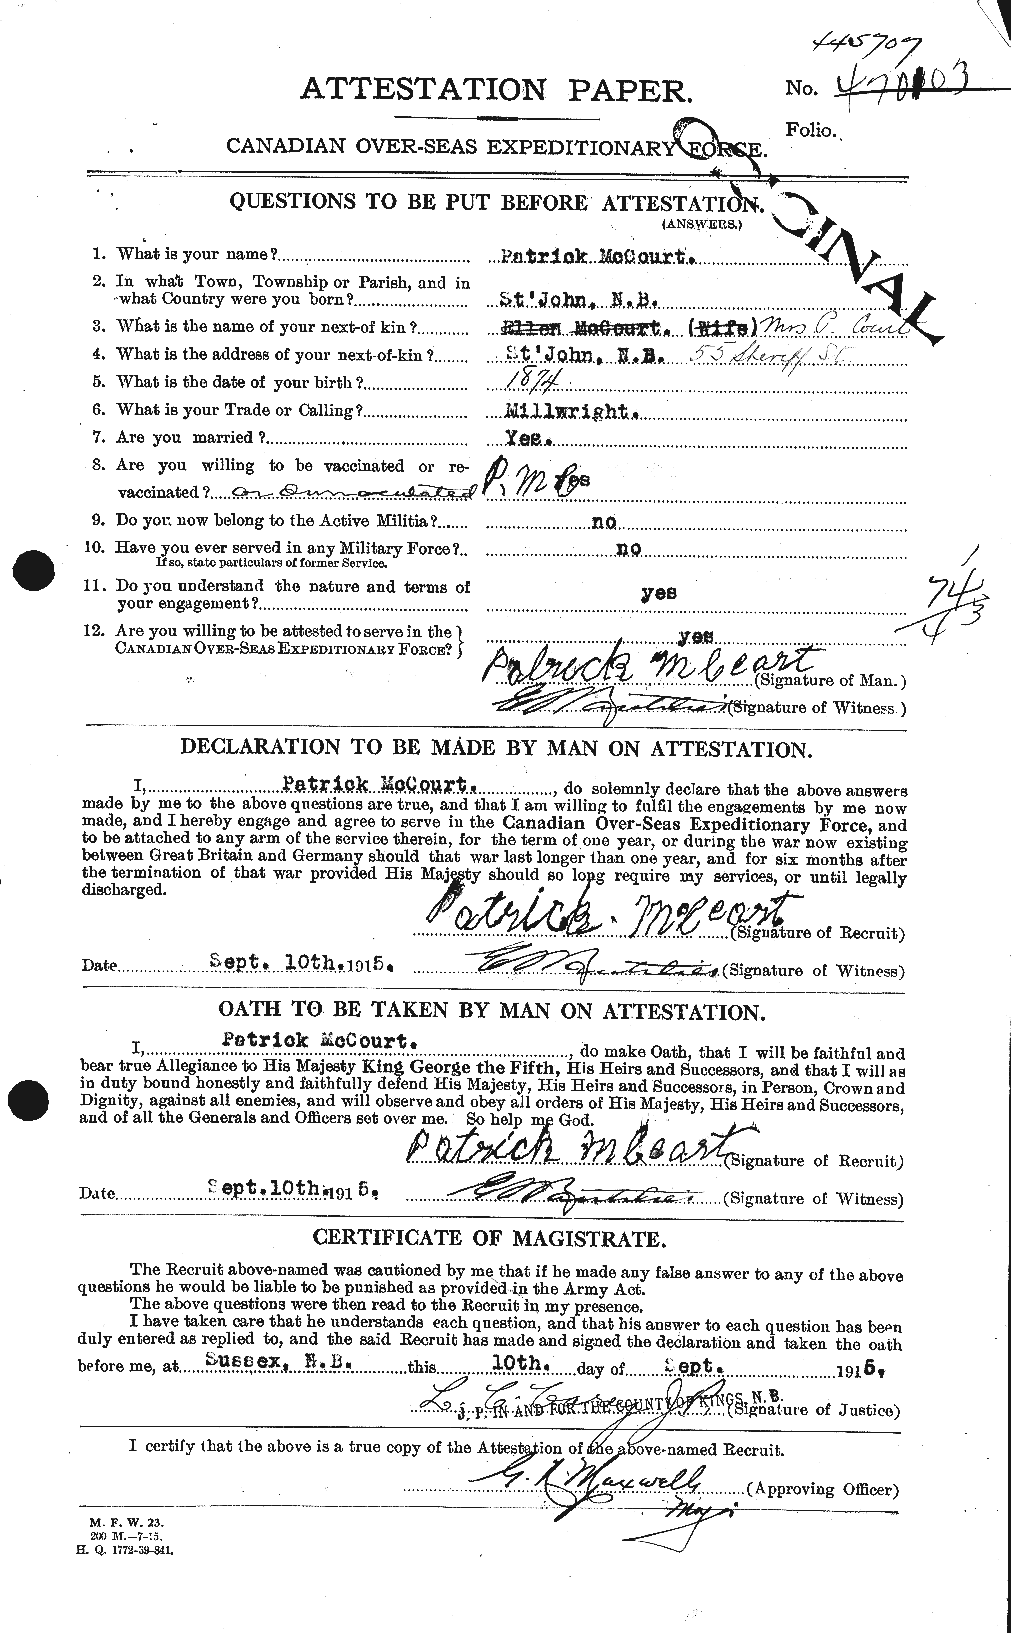 Personnel Records of the First World War - CEF 134944a